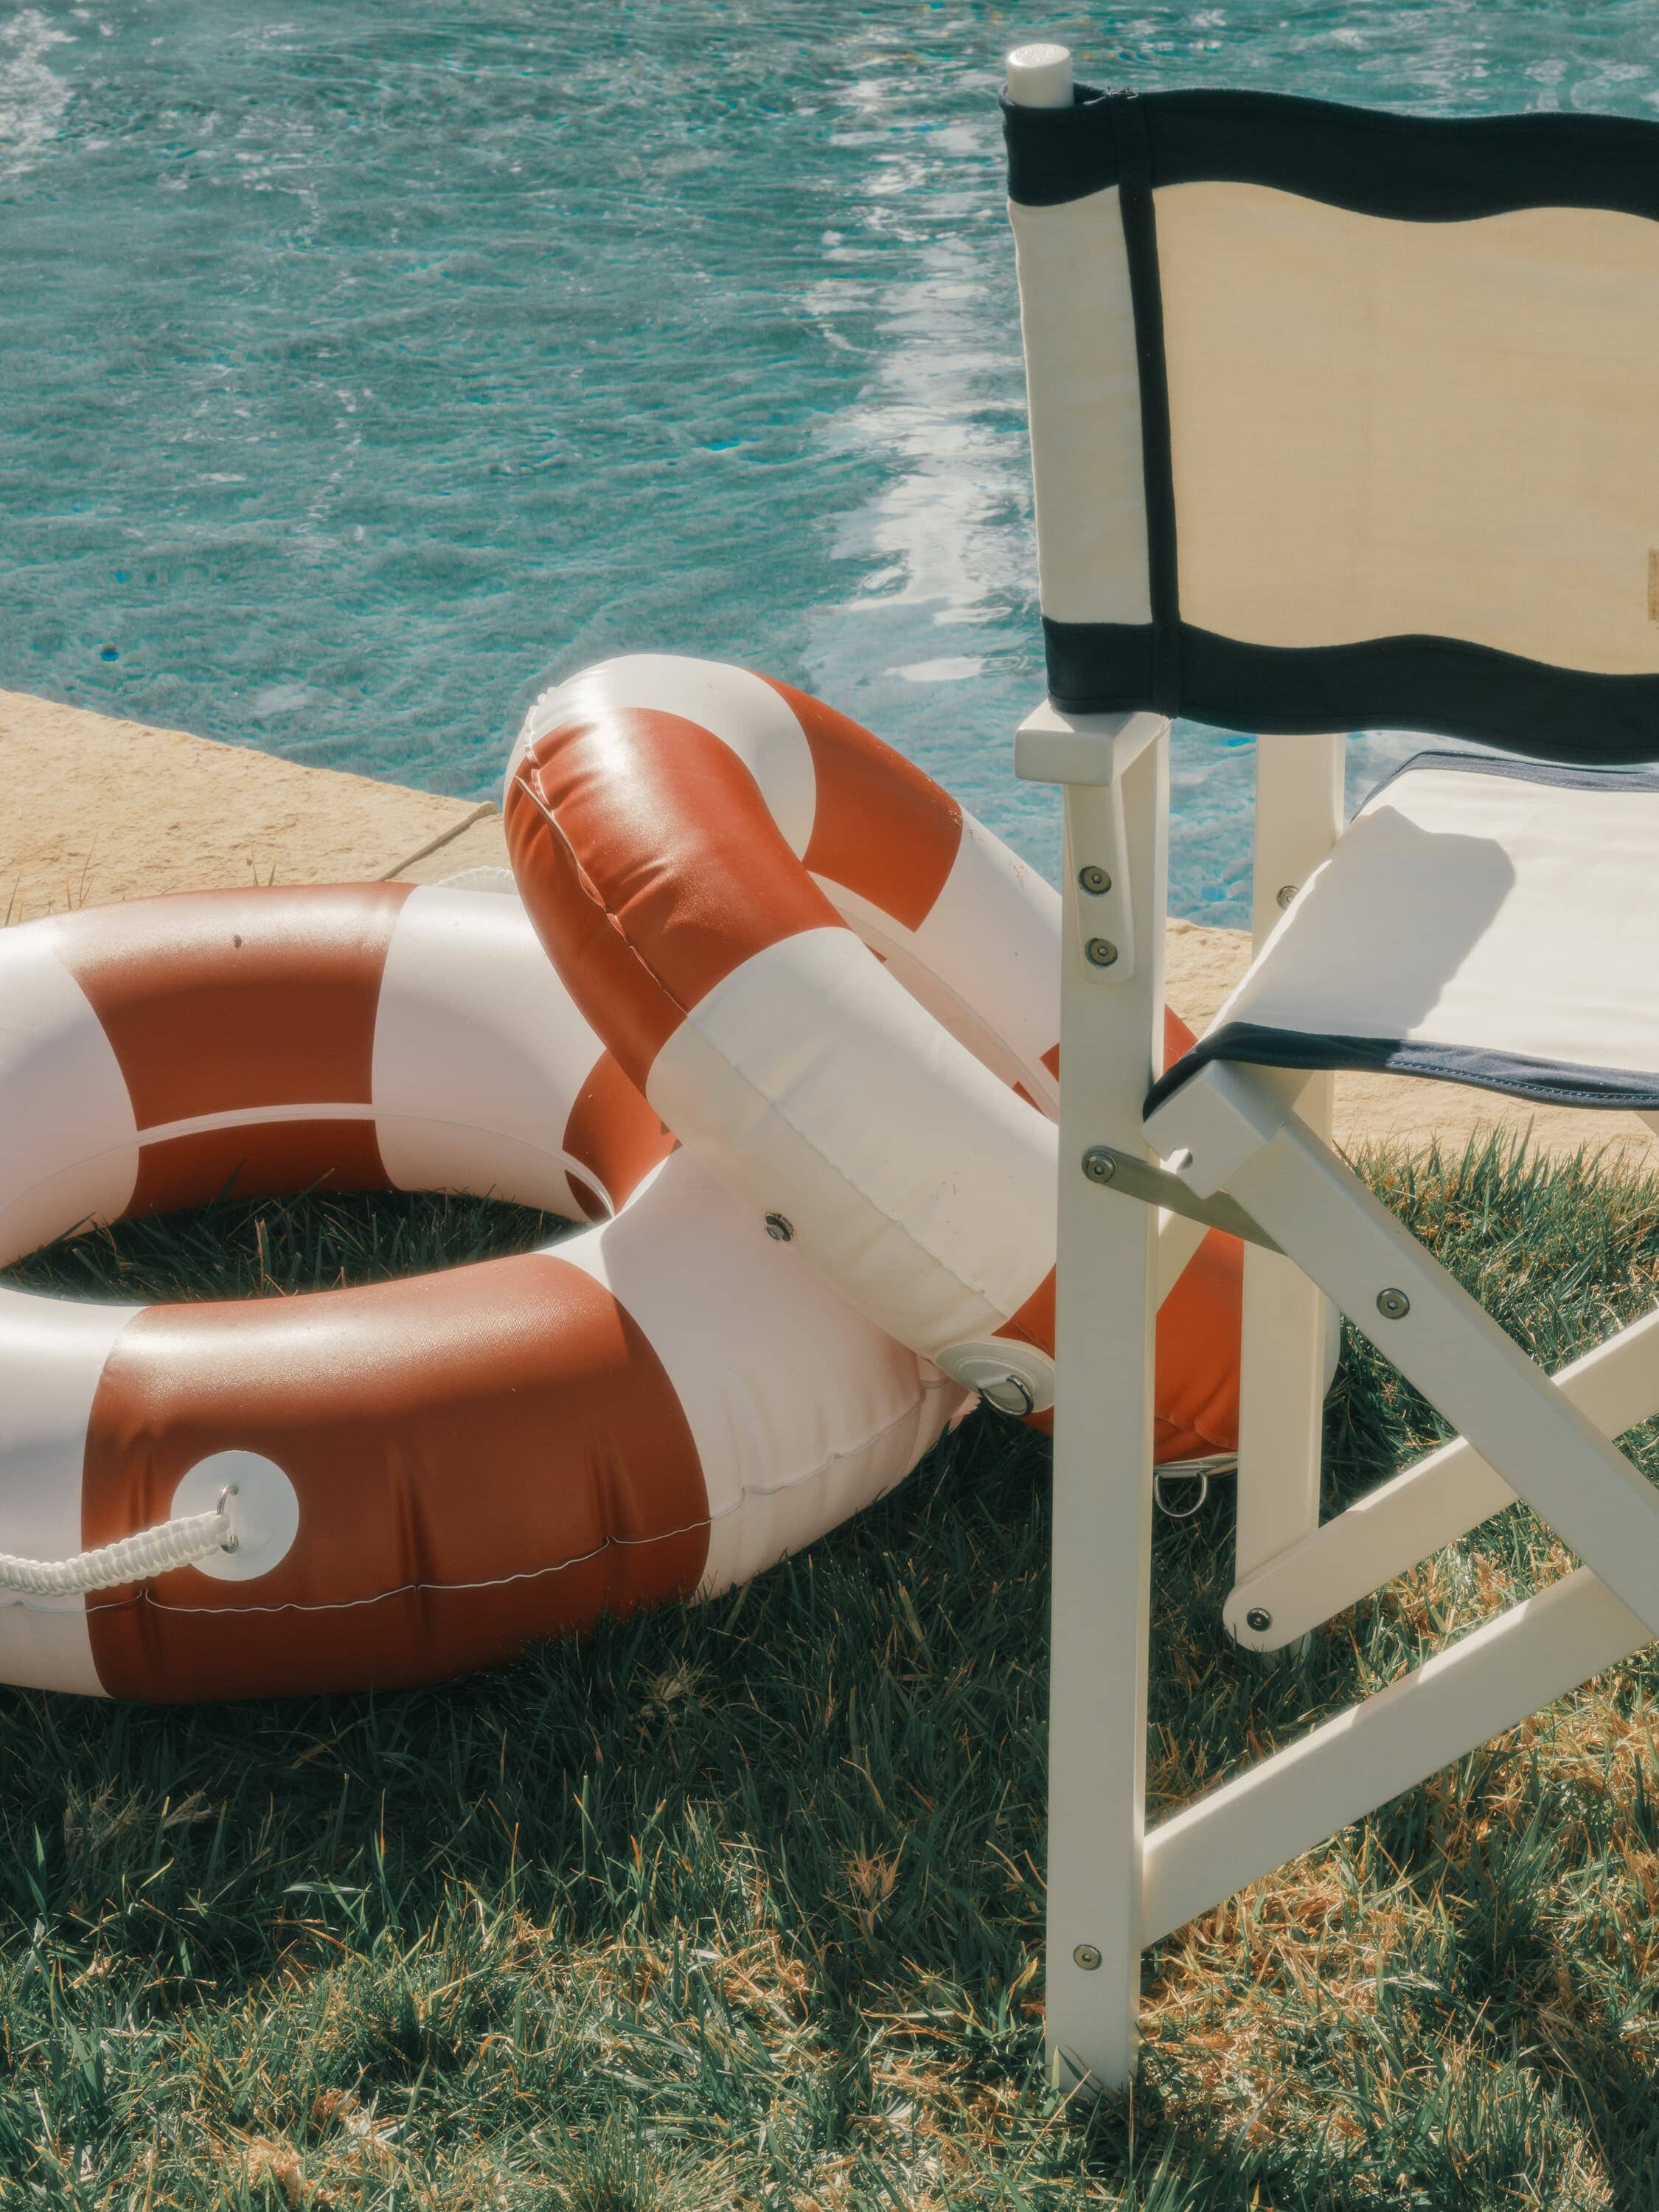 pool rings stacked next to a chair